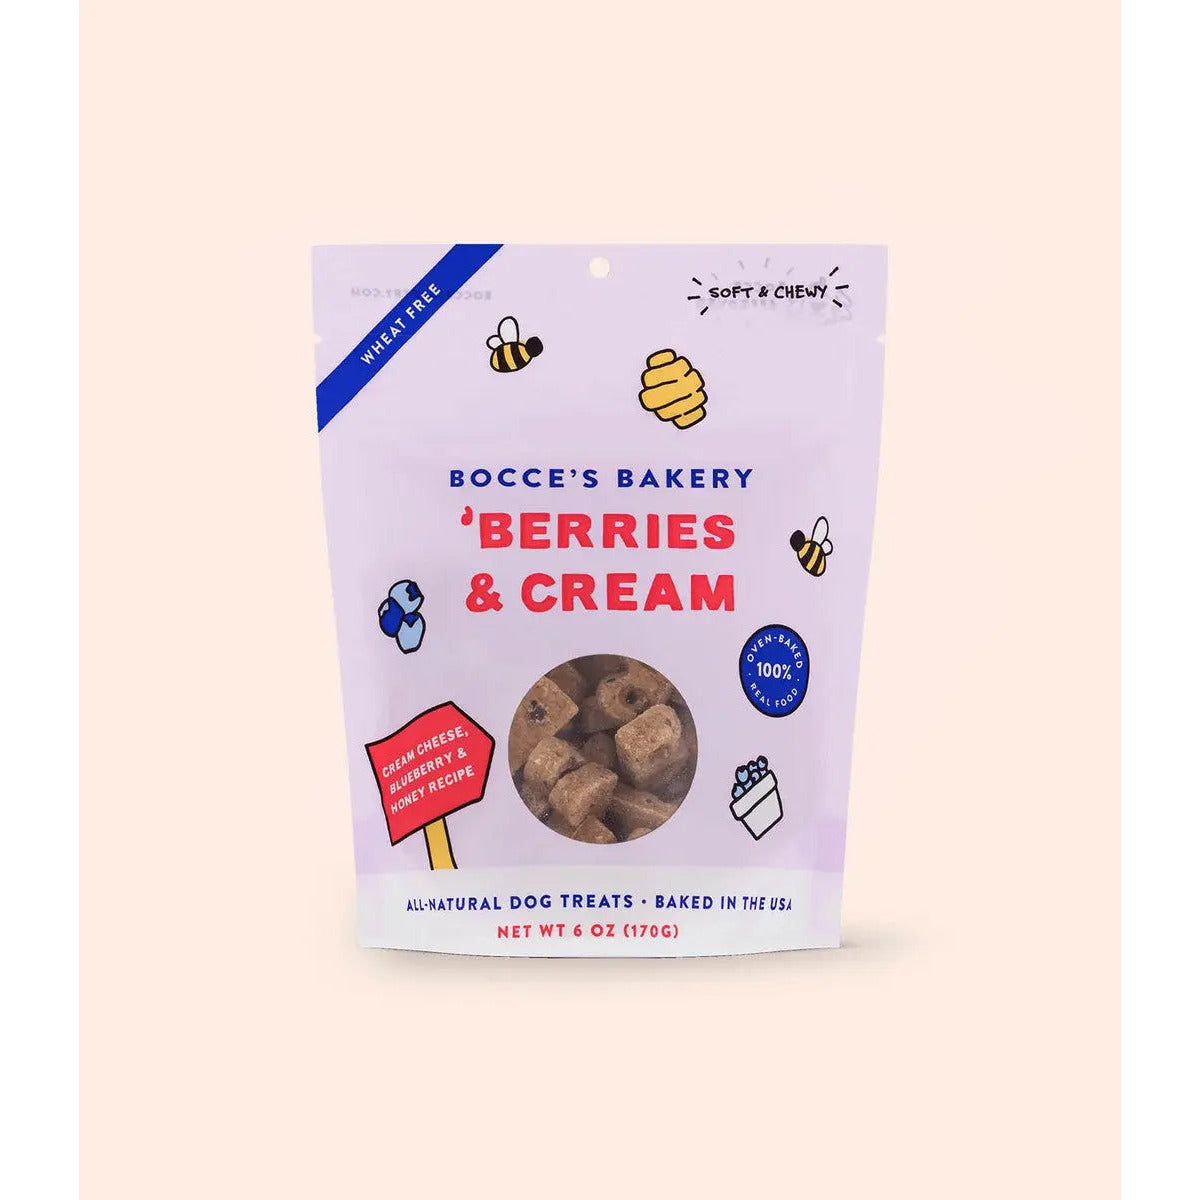 Bocce's Bakery Berries & Cream 6oz Soft & Chewy Dog Treats Bocce's Bakery